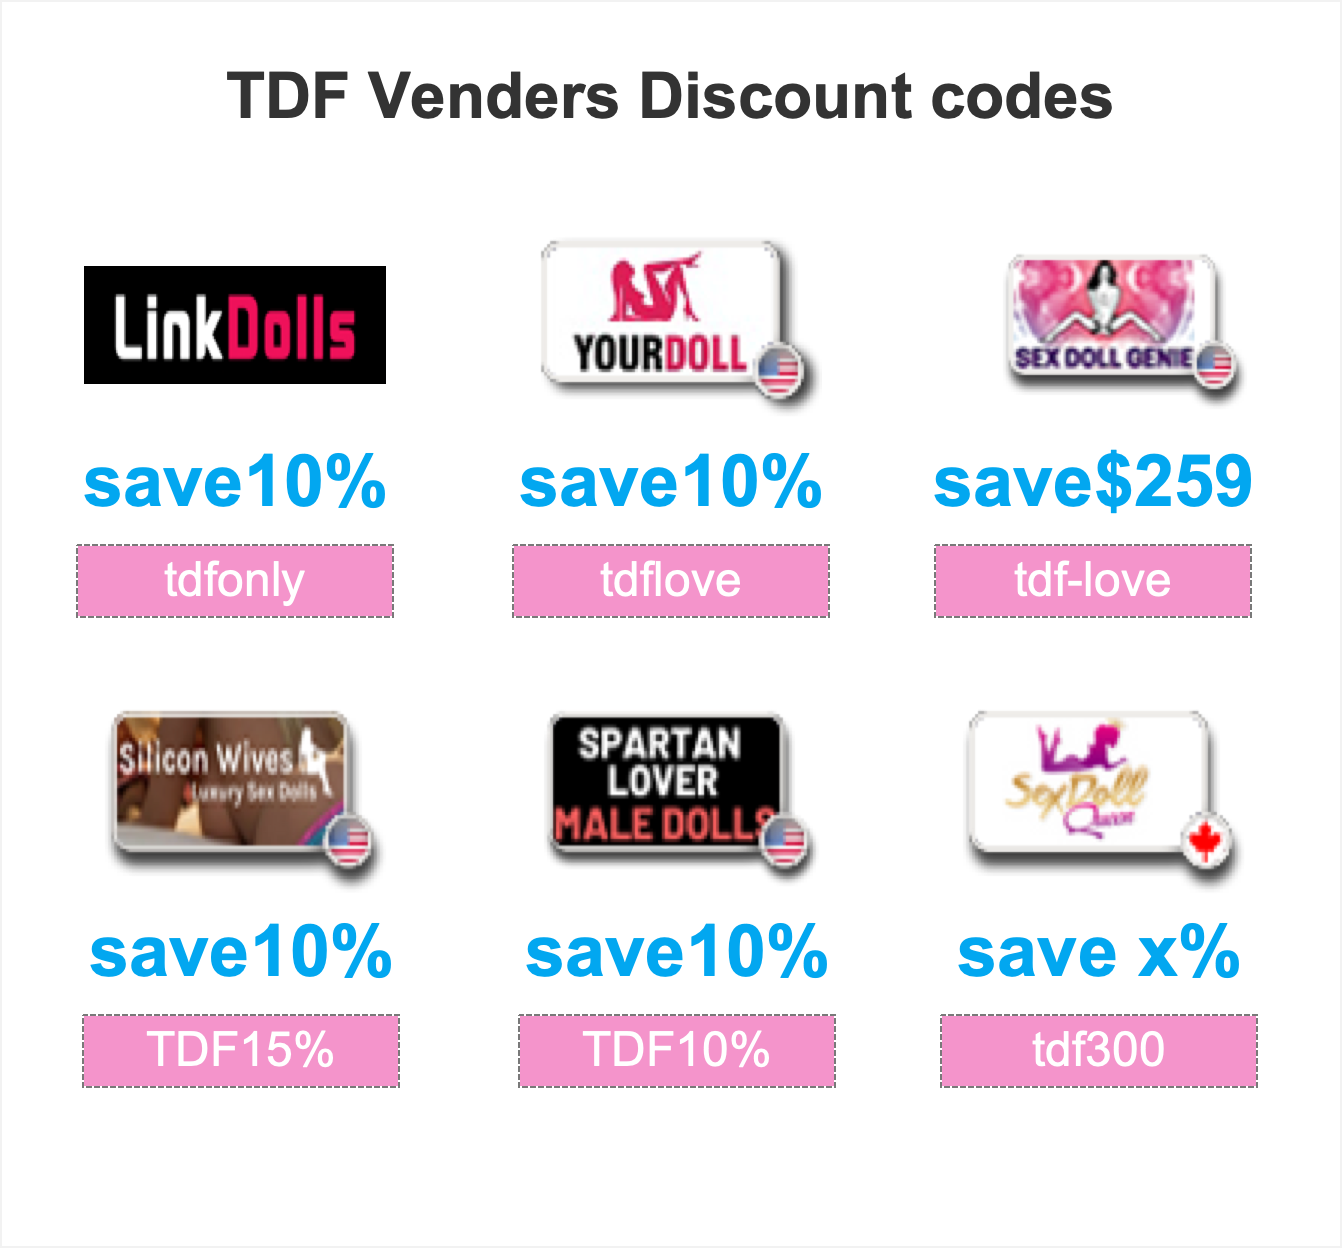 TDF Venders Discount codes Summary (updating) picture pic